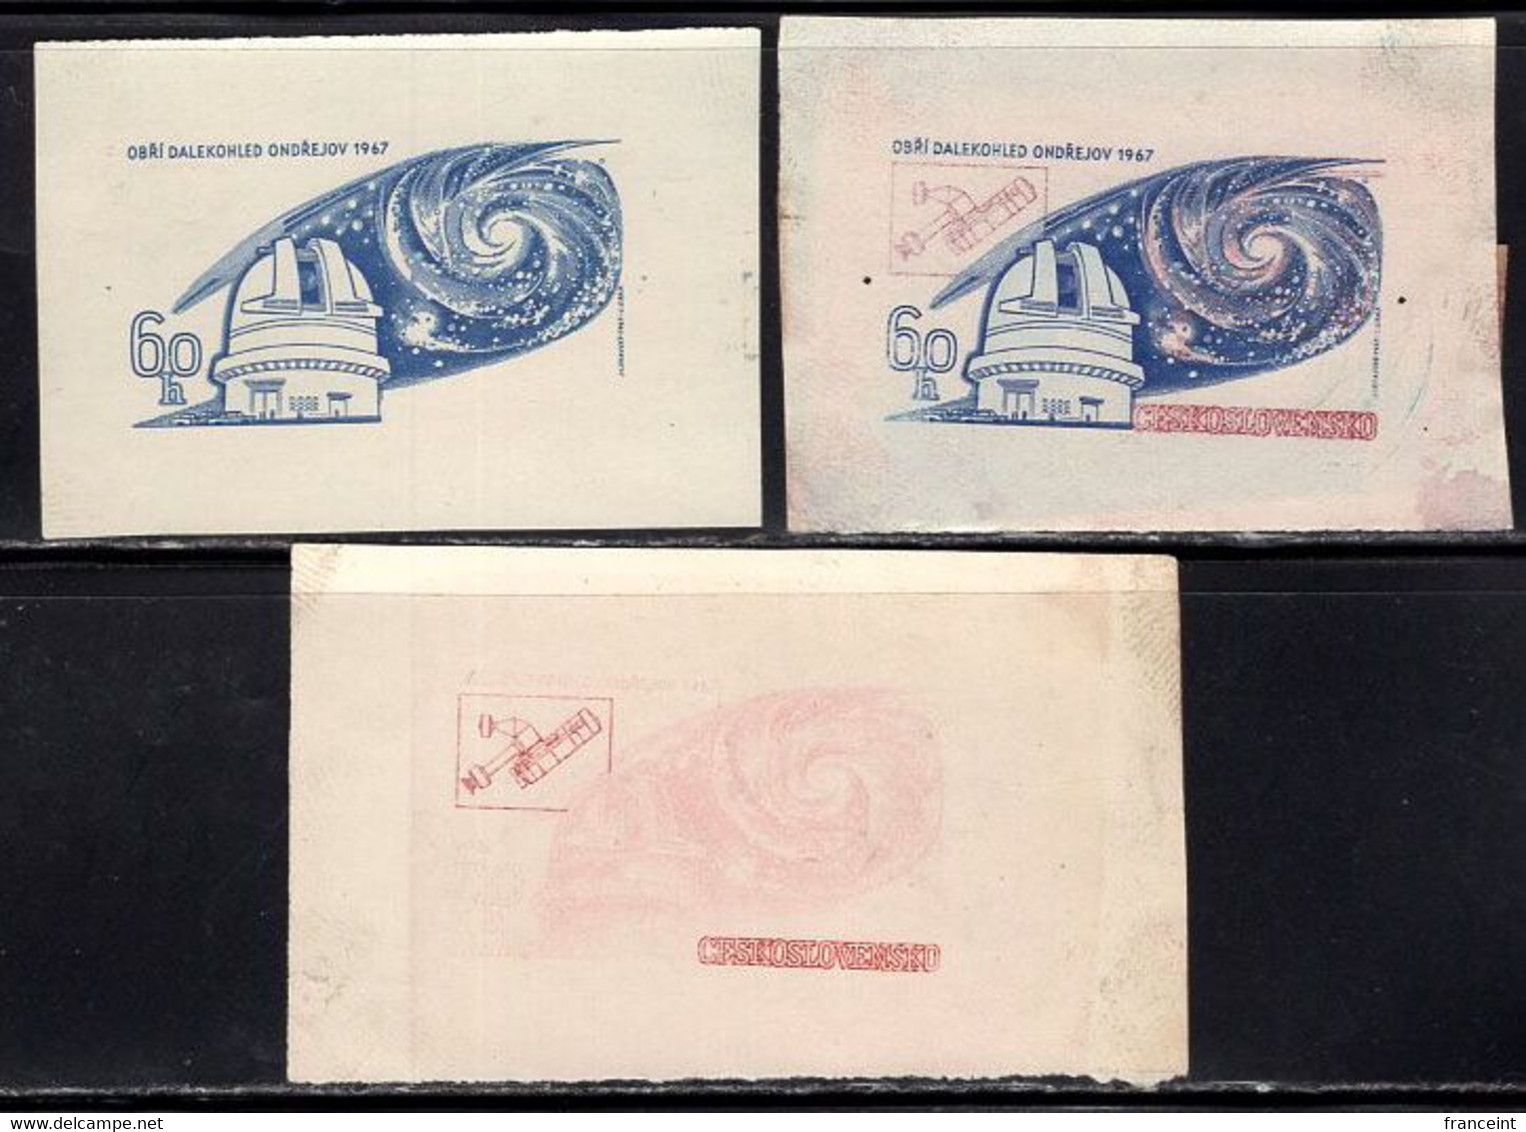 CZECHOSLOVAKIA (1967) Ondrejov Observatory. Galaxy. Series Of 3 Die Proofs Showing Various Stages. Scott No 1489. - Proofs & Reprints